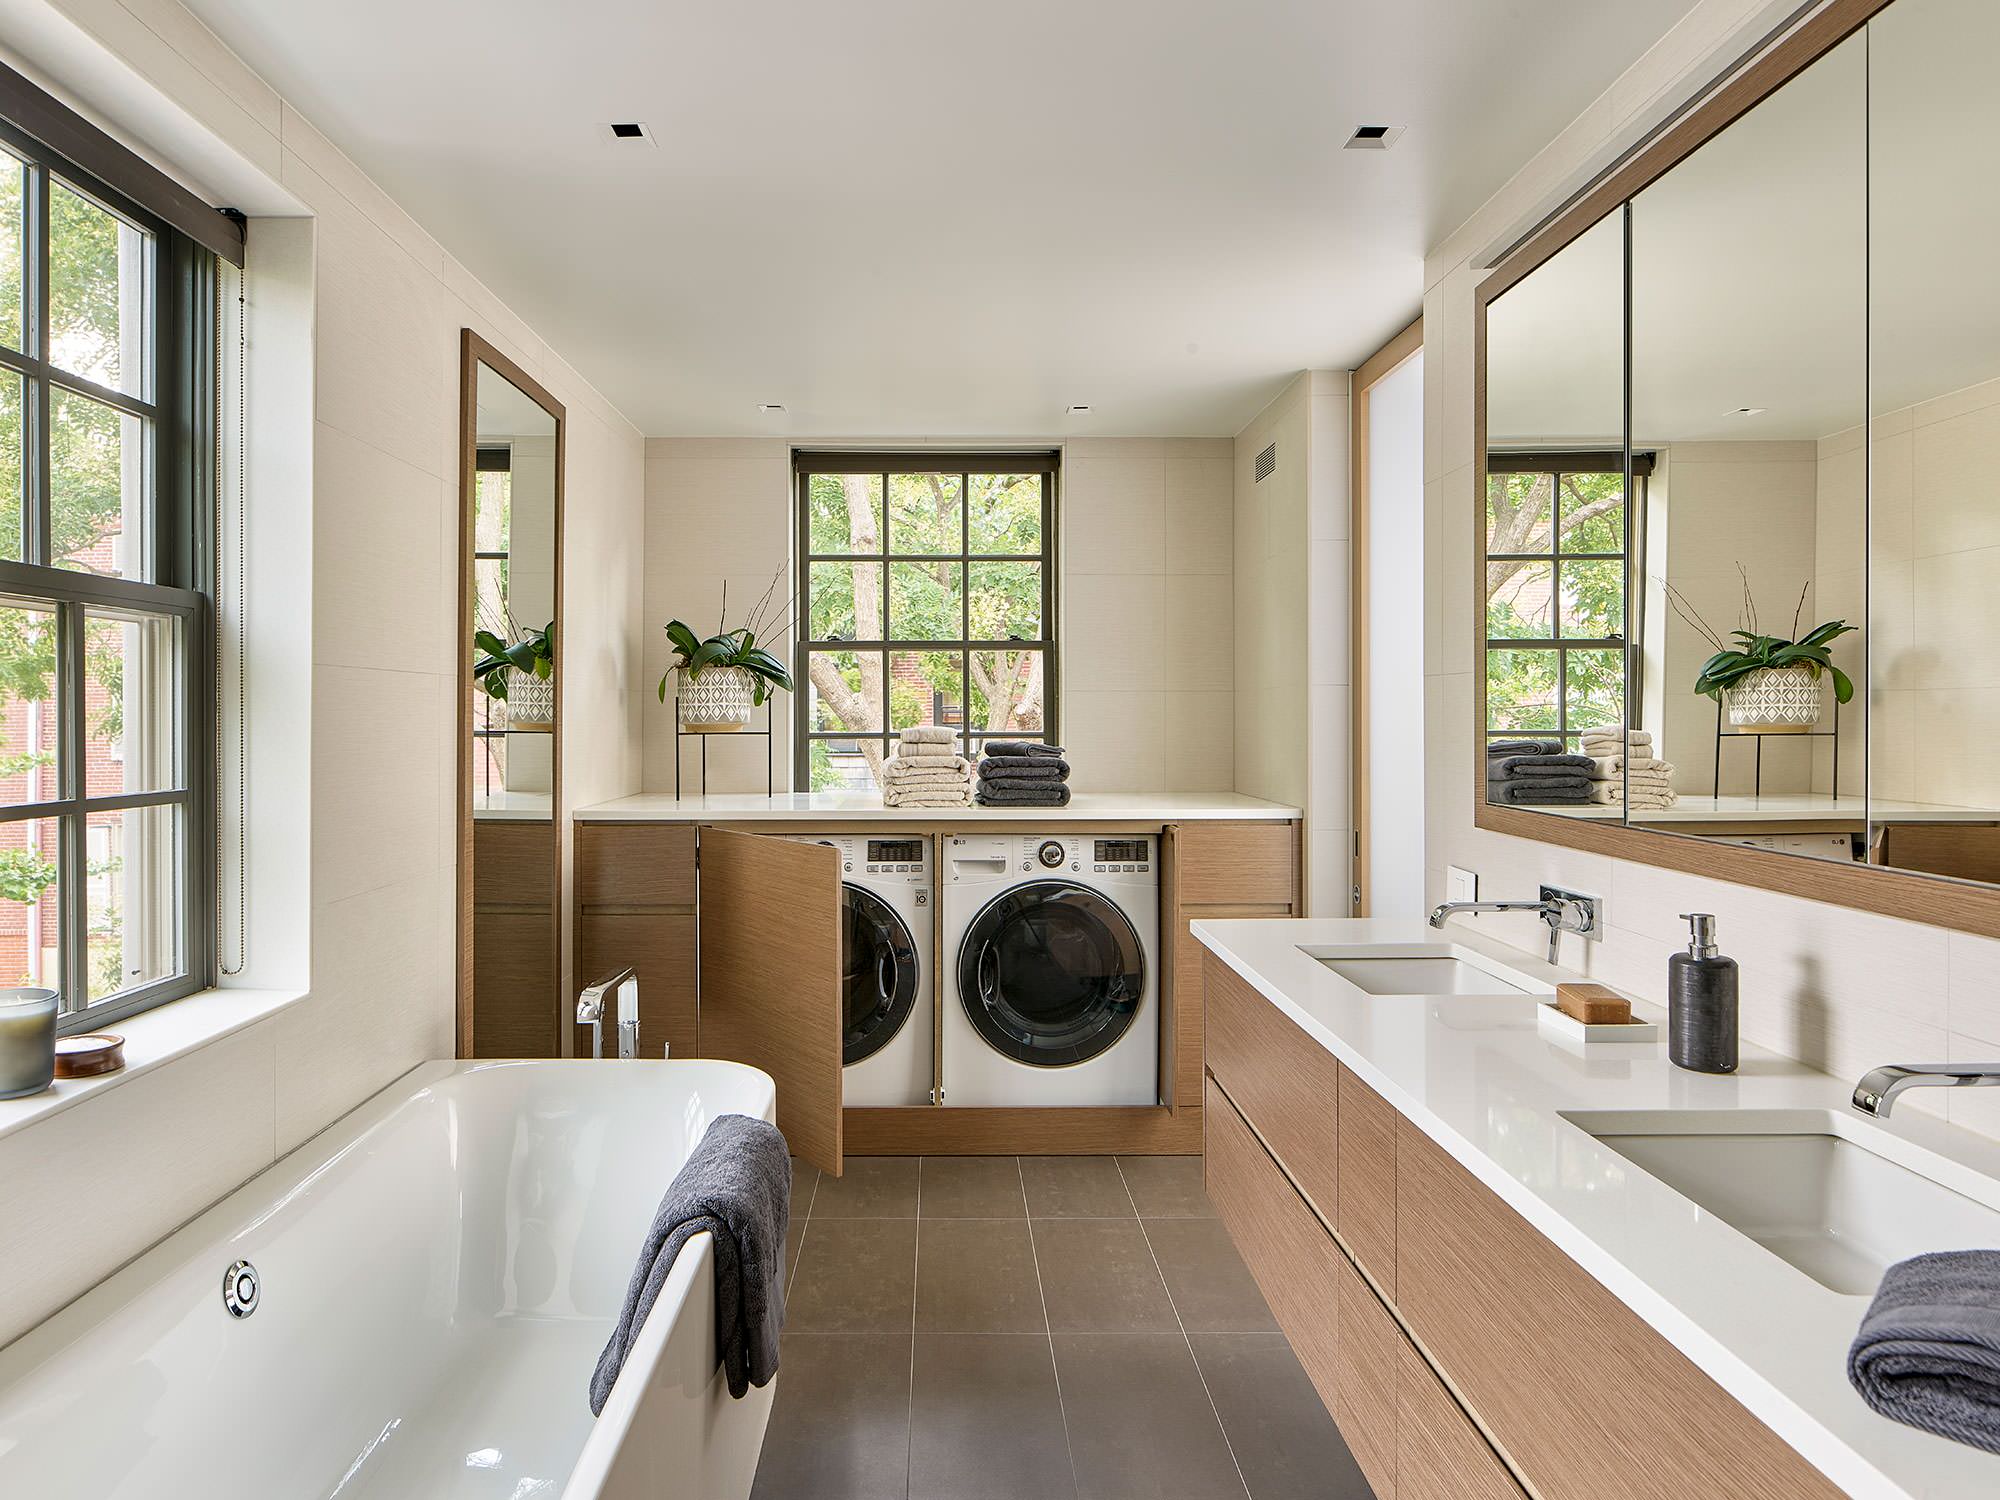 75 Bathroom Laundry Room Pictures Ideas To Try In 2021 Houzz - Bathroom Laundry Room Ideas